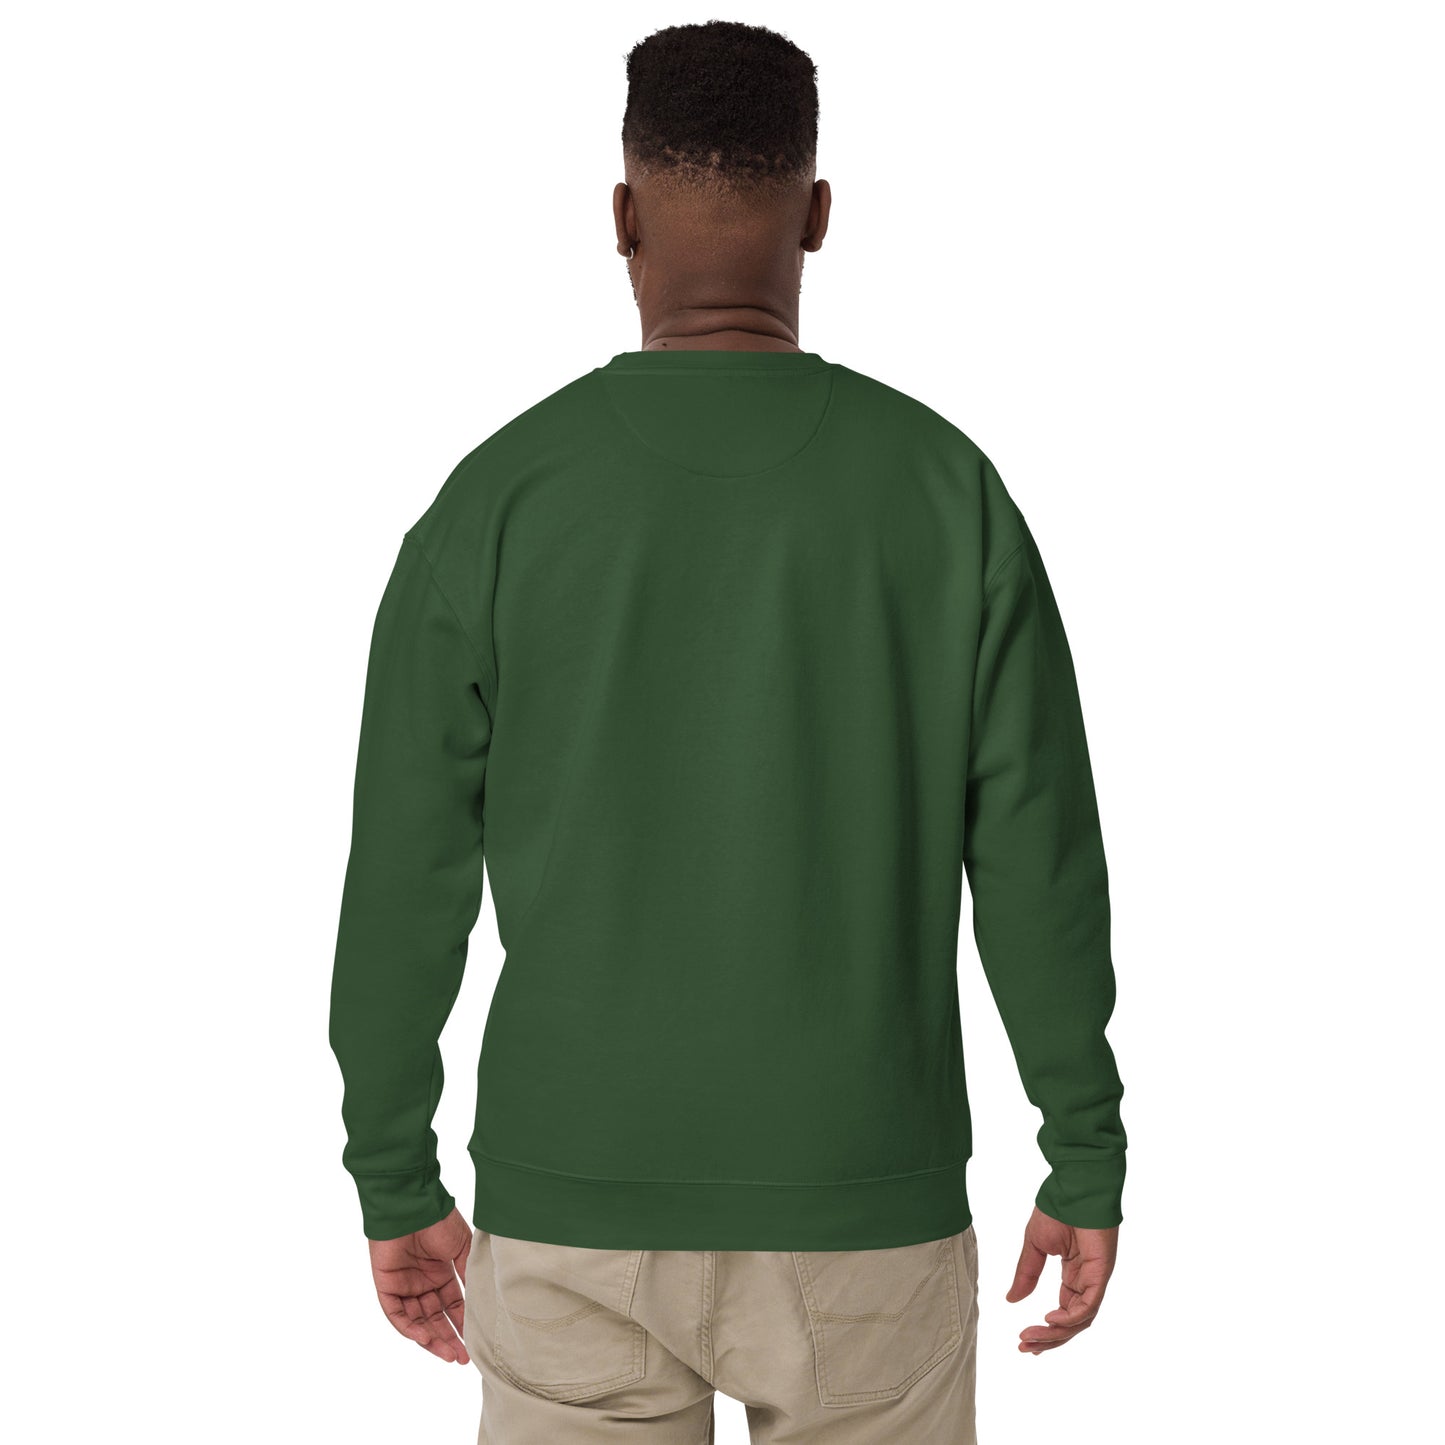 man showing the back of a green premium sweatshirt with a vintage image of wwi soldiers and text that reads harlem hellfighters